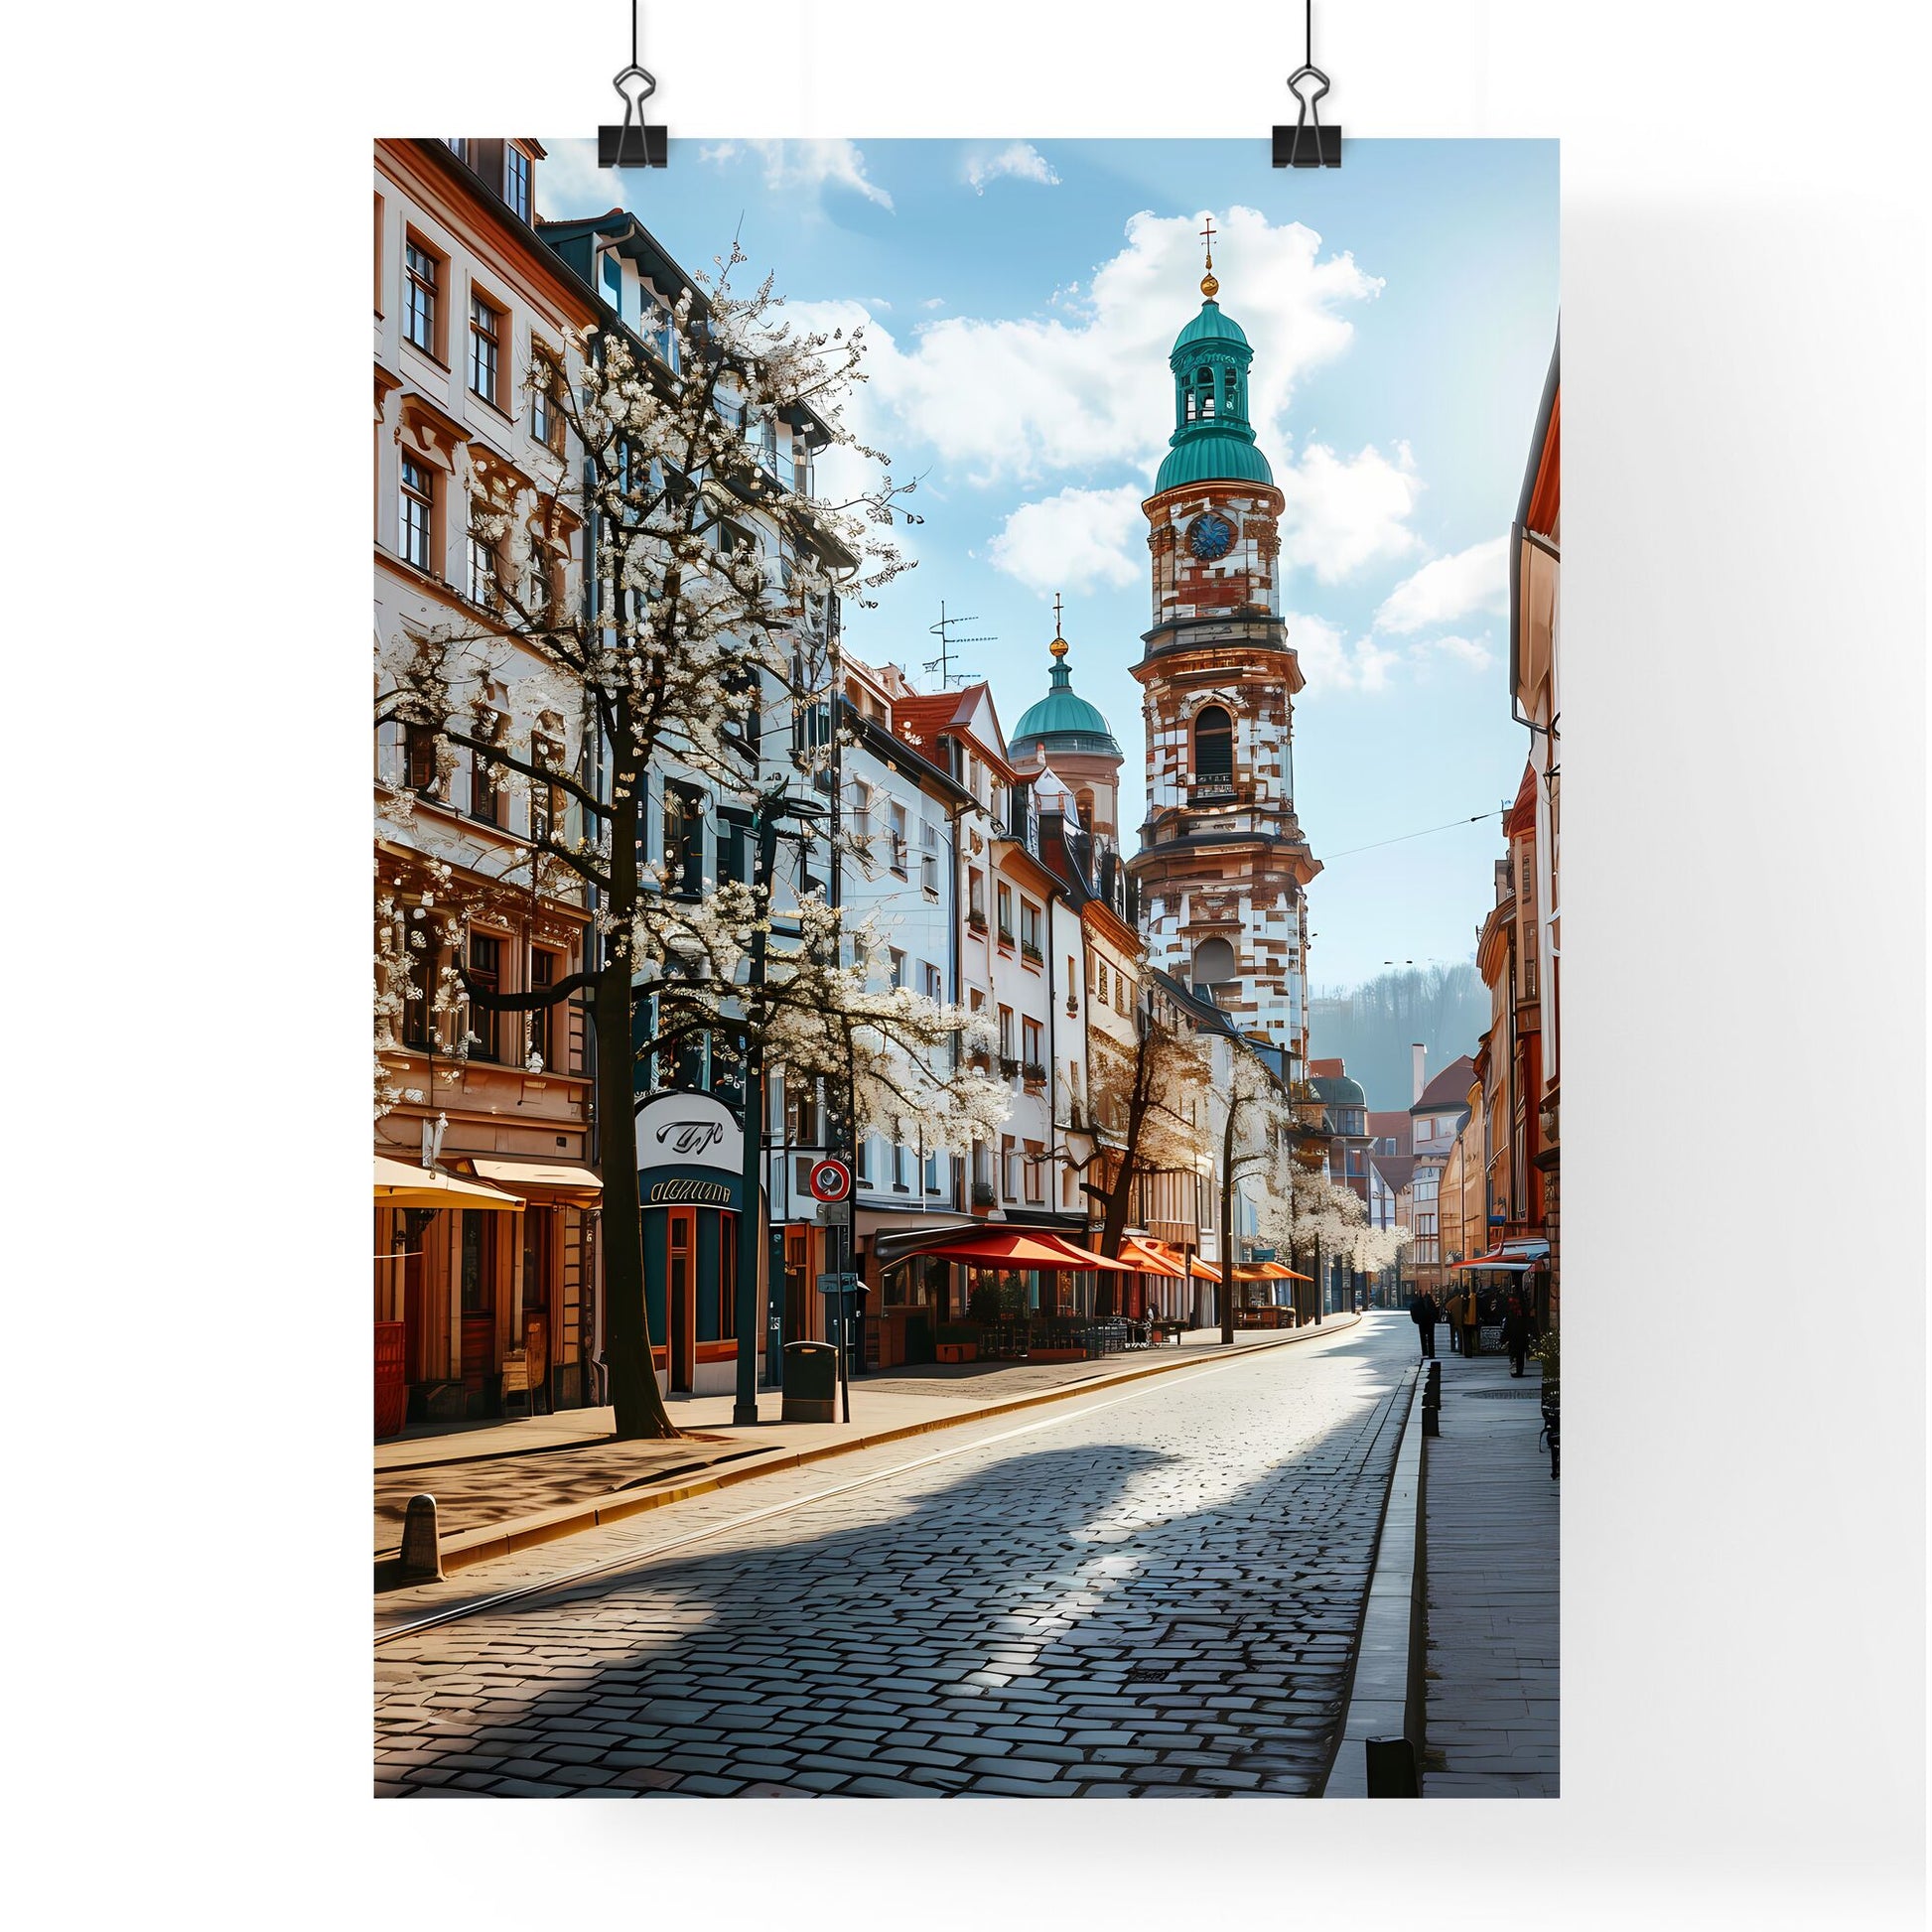 A Poster of Darmstadt Hesse germany Skyline - A Street With Buildings And A Clock Tower Default Title